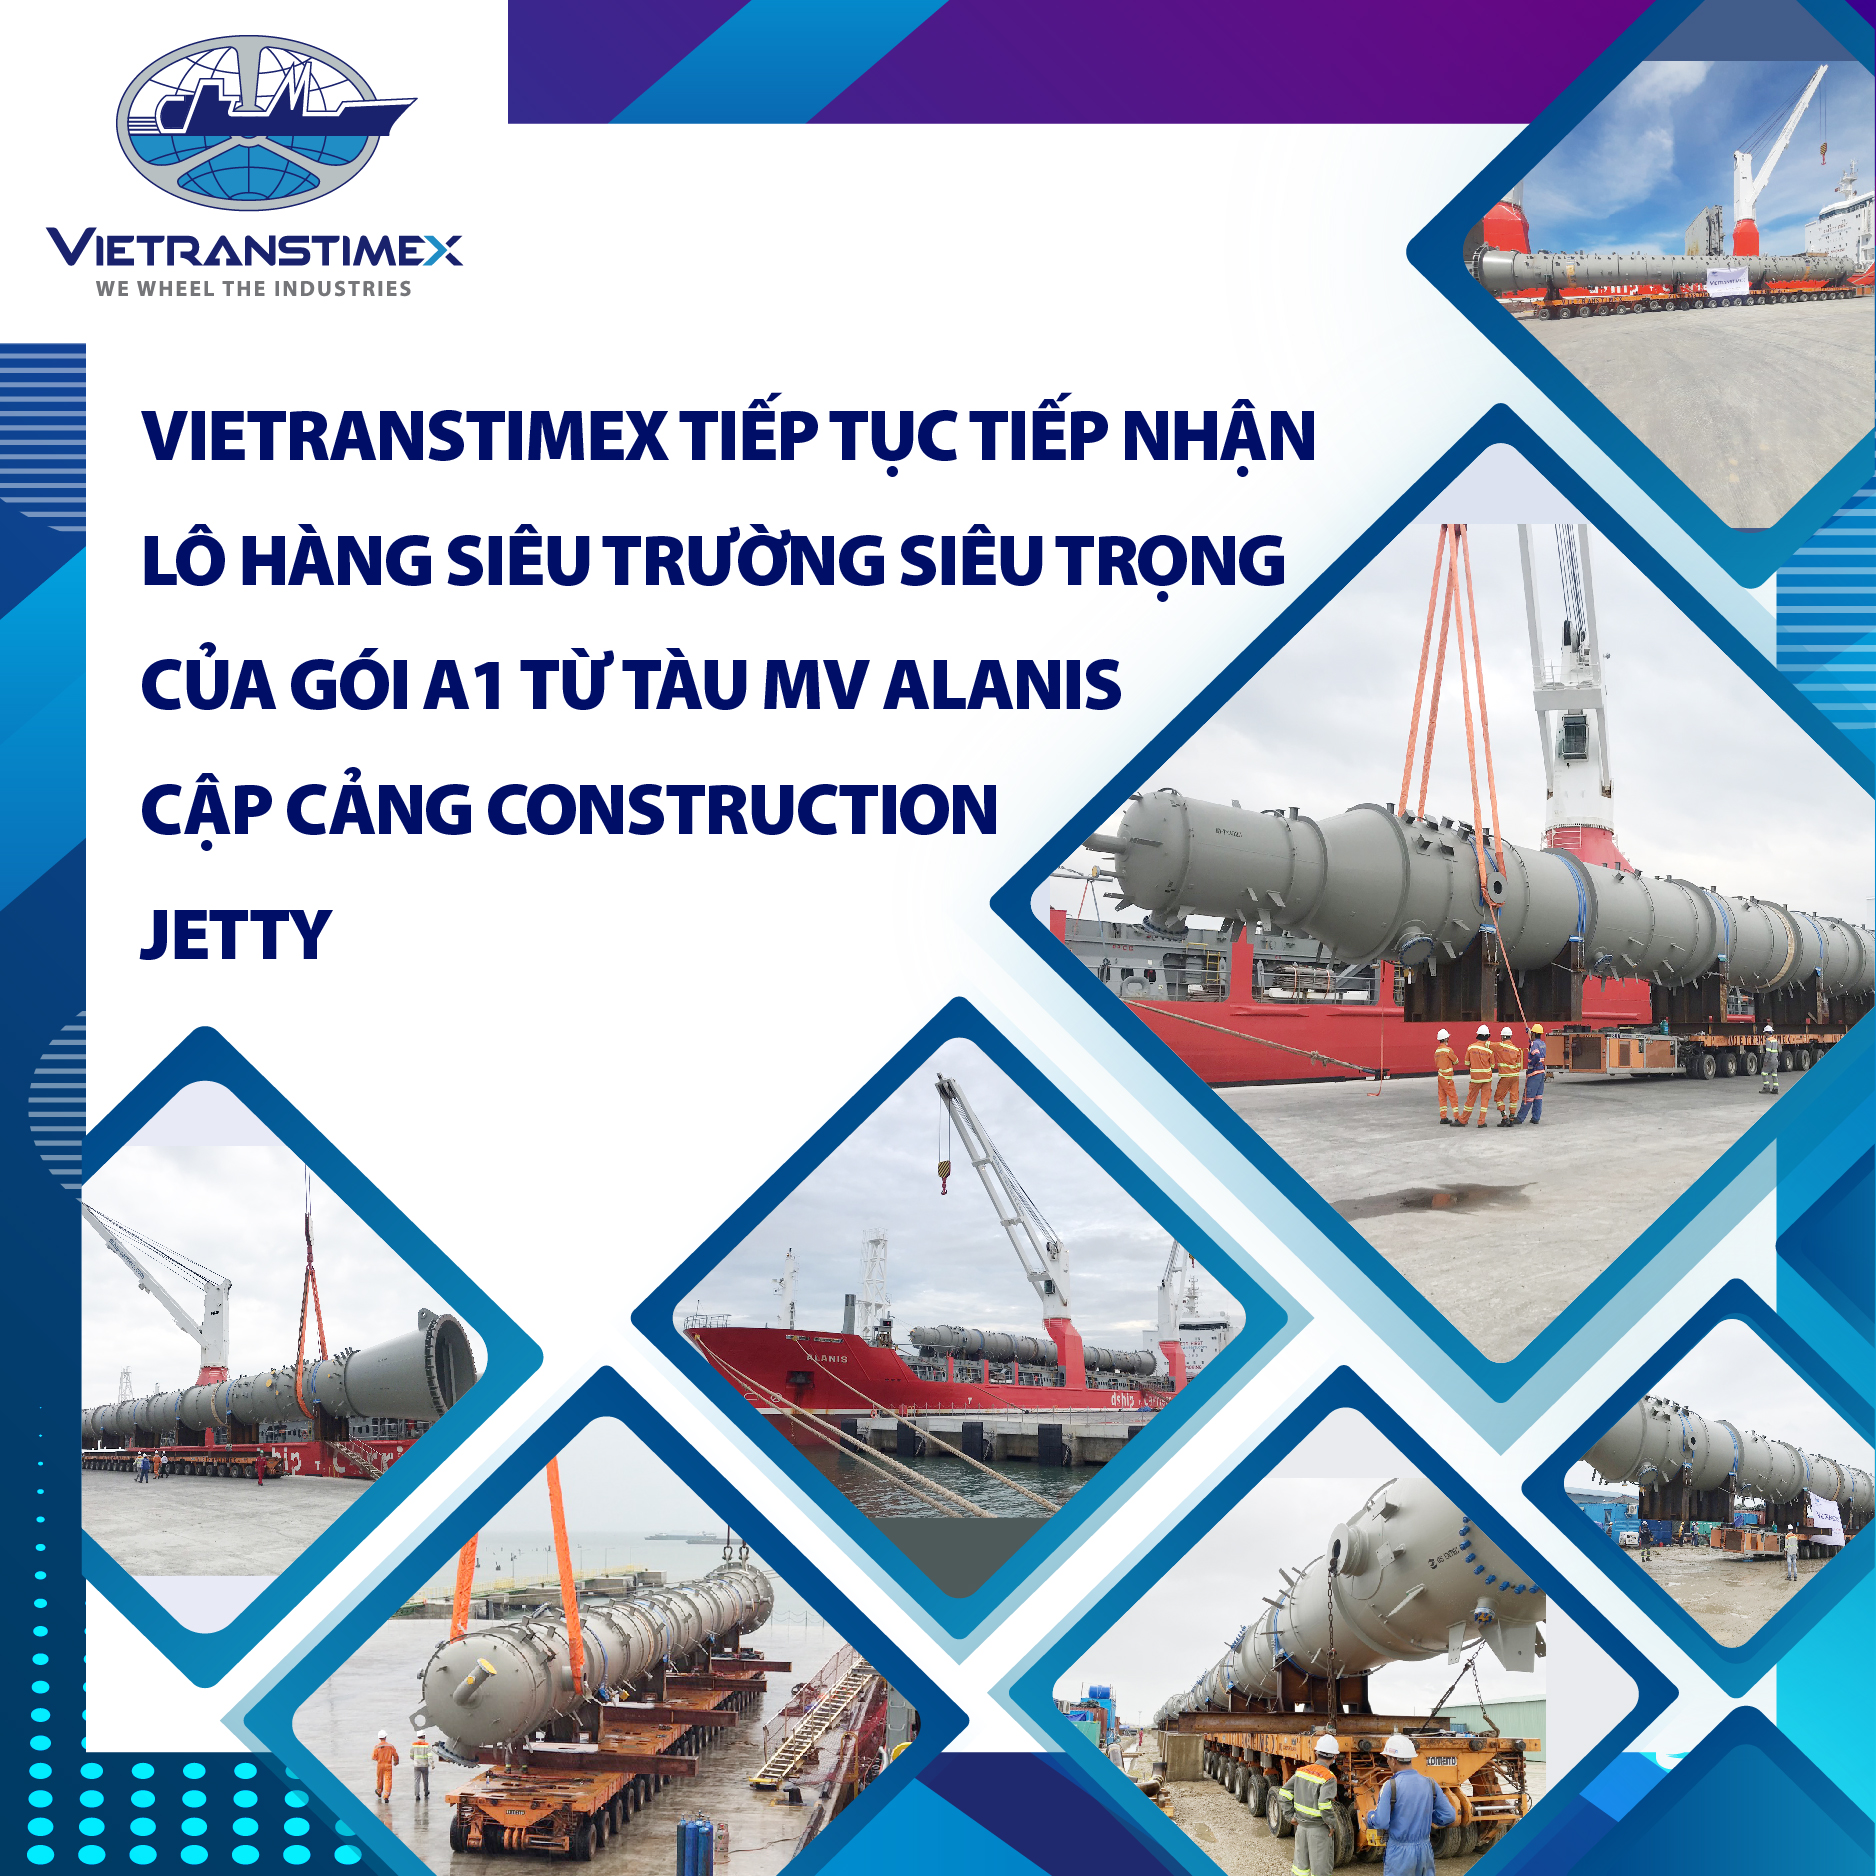 Vietranstimex Continuously Received Heavy Cargos Of Package A1 From The MV Alanis Docked At Construction Jetty Port